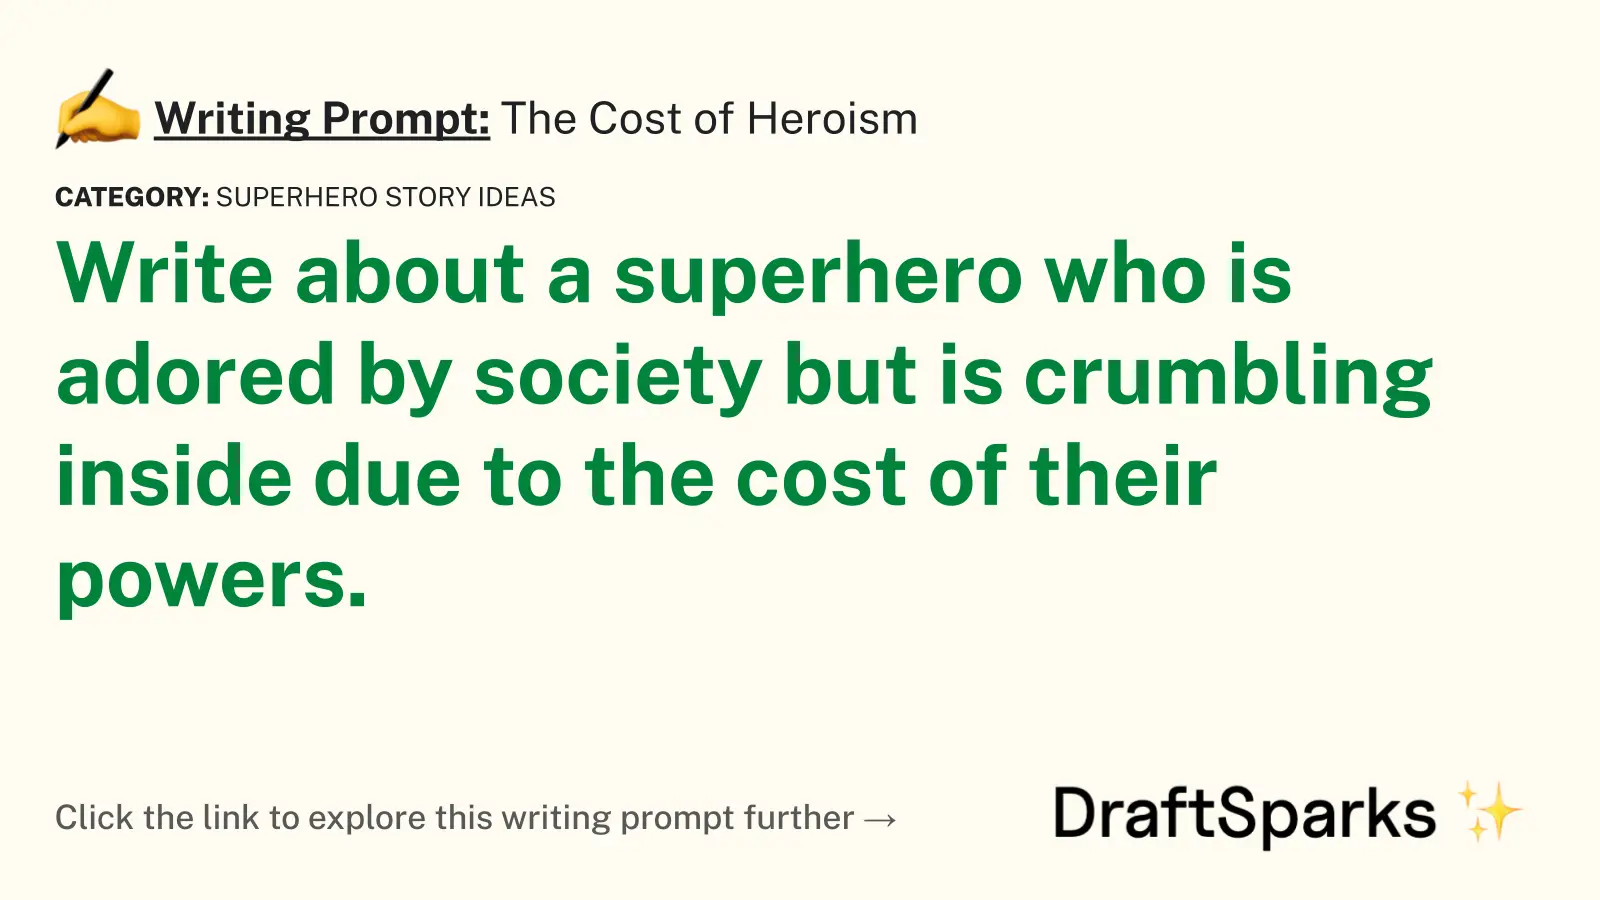 The Cost of Heroism